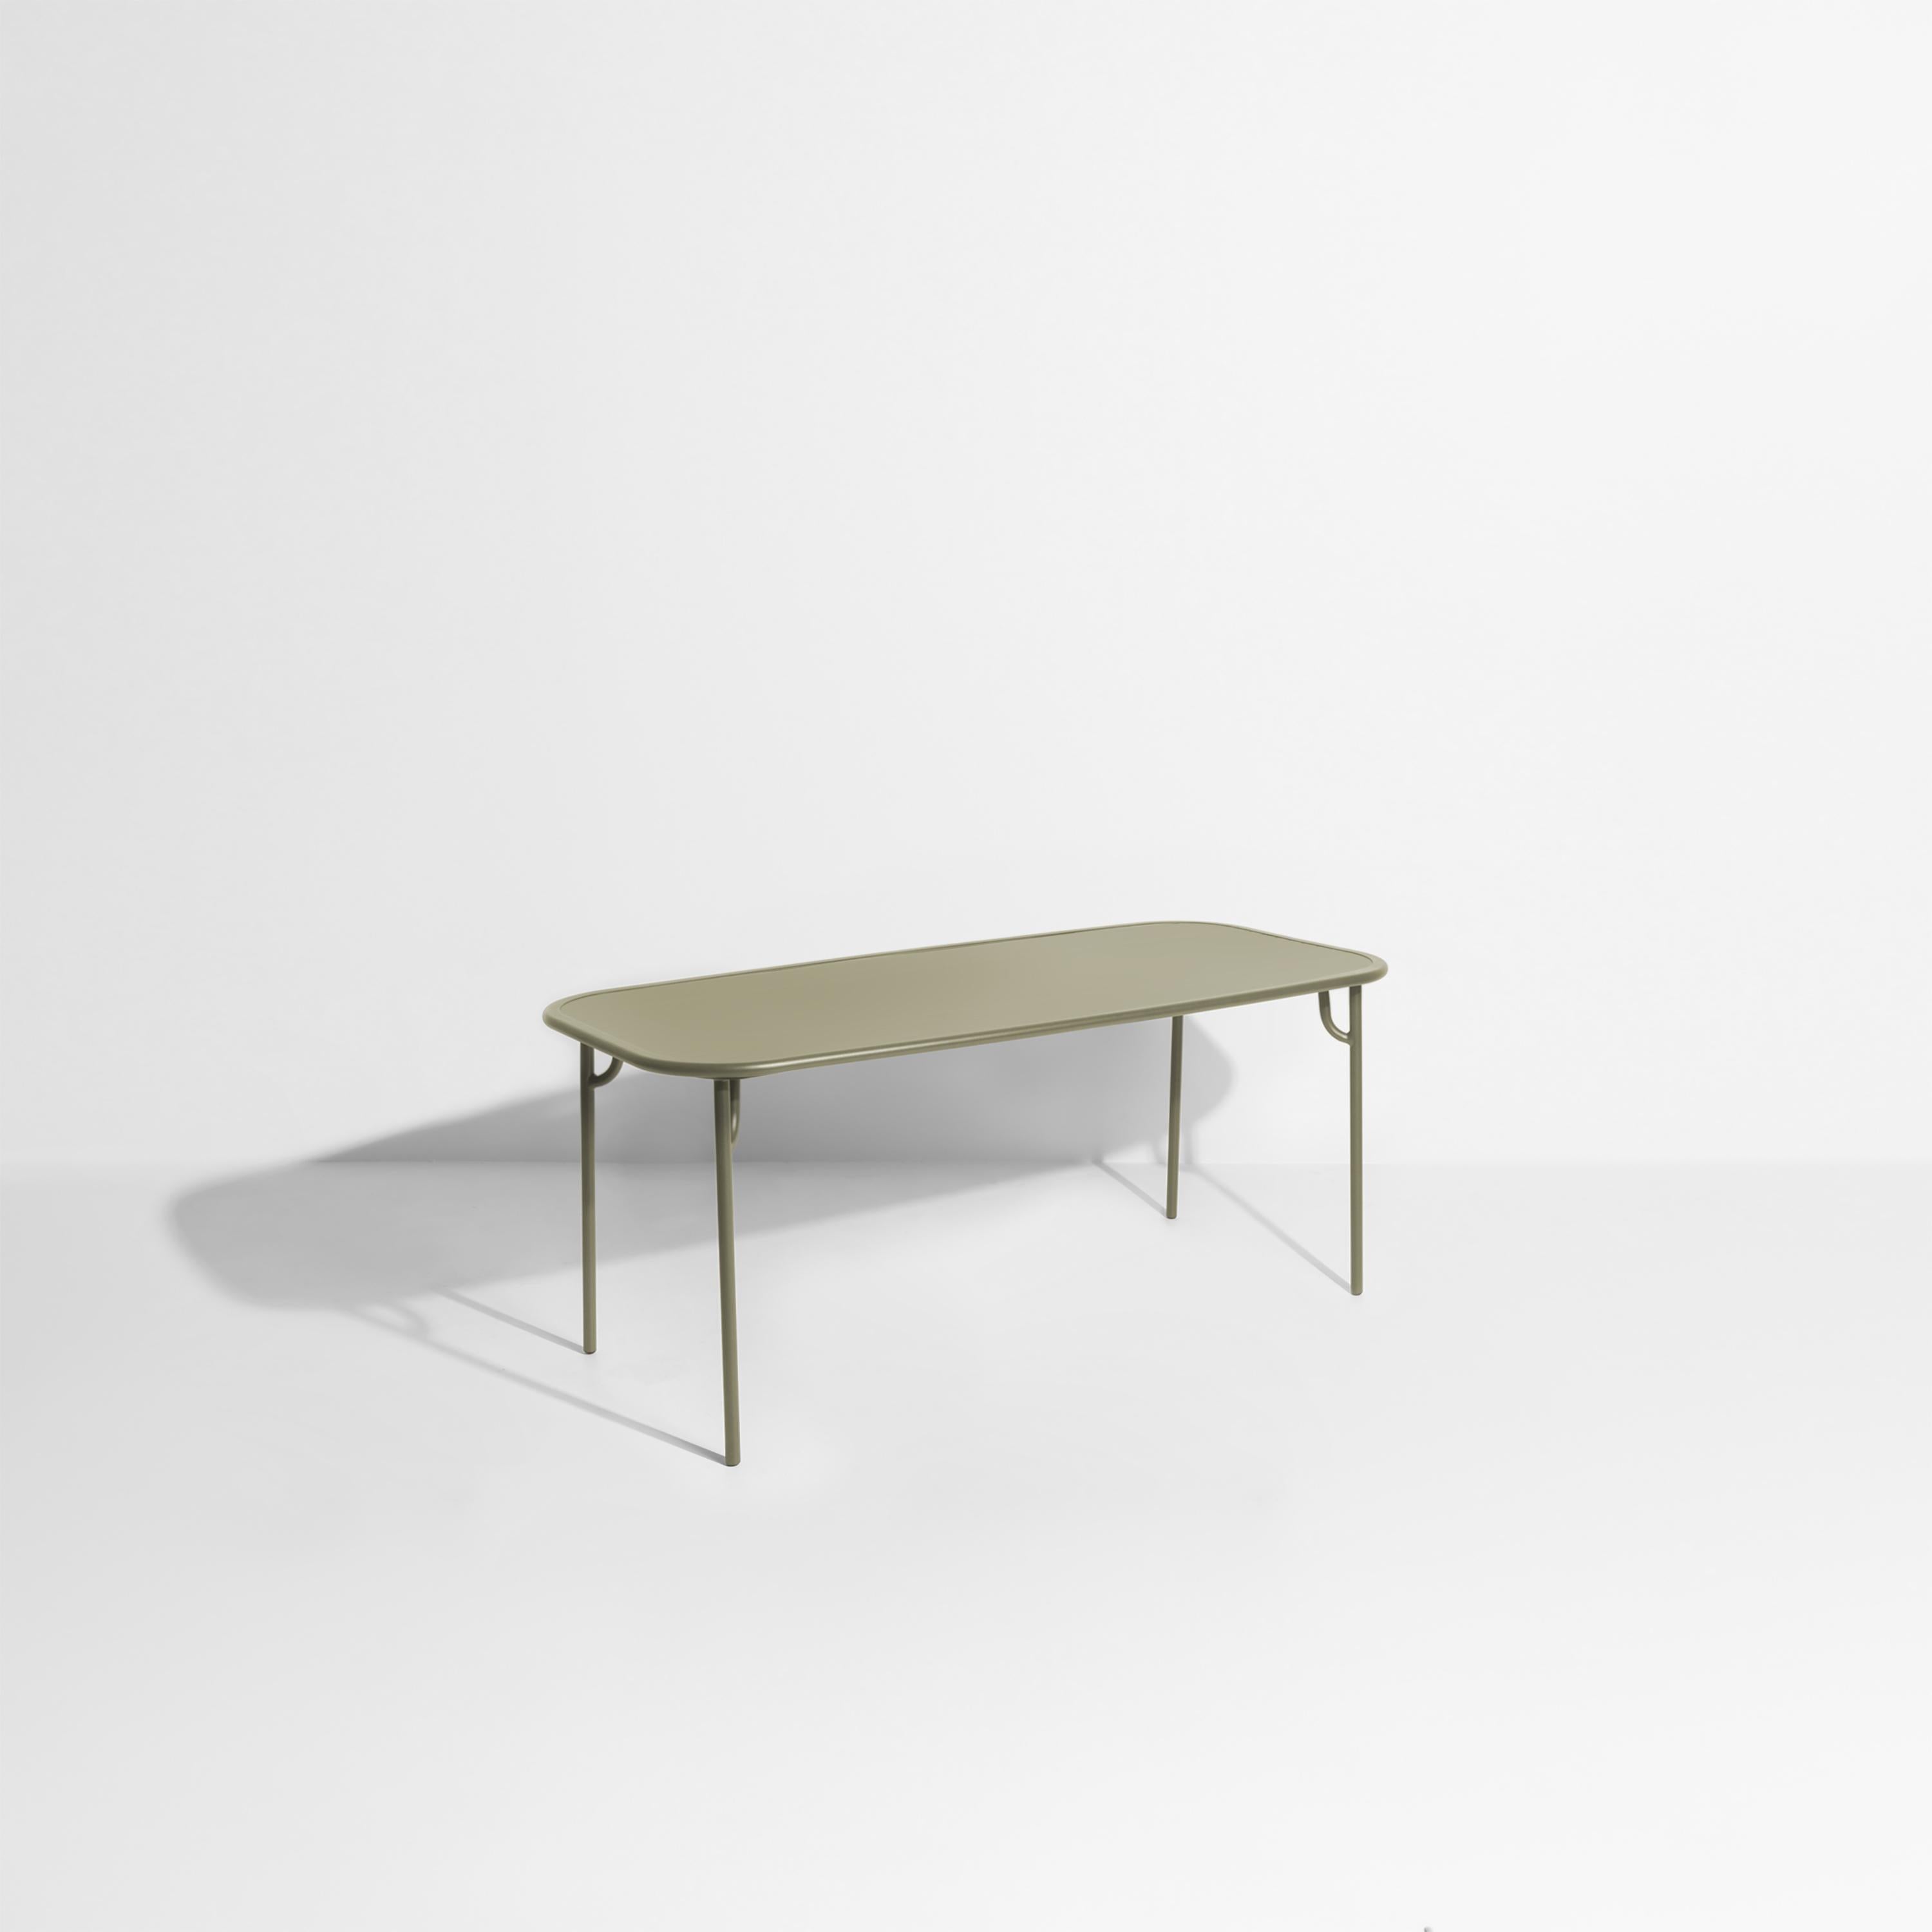 Petite Friture Week-End Medium Plain Rectangular Dining Table in Jade Green Aluminium by Studio BrichetZiegler, 2017

The week-end collection is a full range of outdoor furniture, in aluminium grained epoxy paint, matt finish, that includes 18